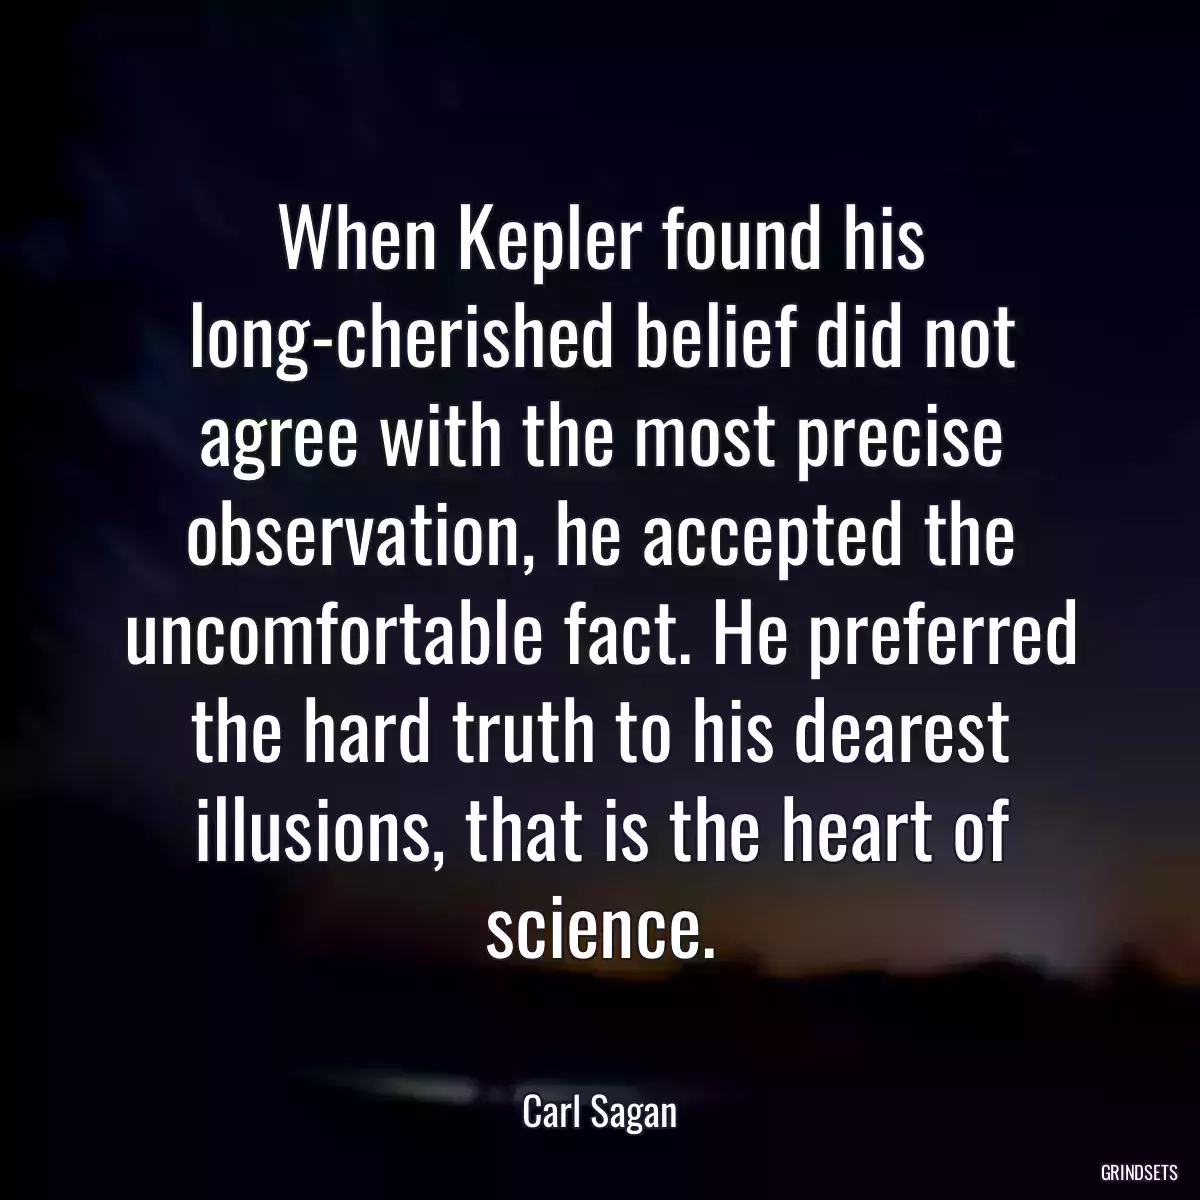 When Kepler found his long-cherished belief did not agree with the most precise observation, he accepted the uncomfortable fact. He preferred the hard truth to his dearest illusions, that is the heart of science.